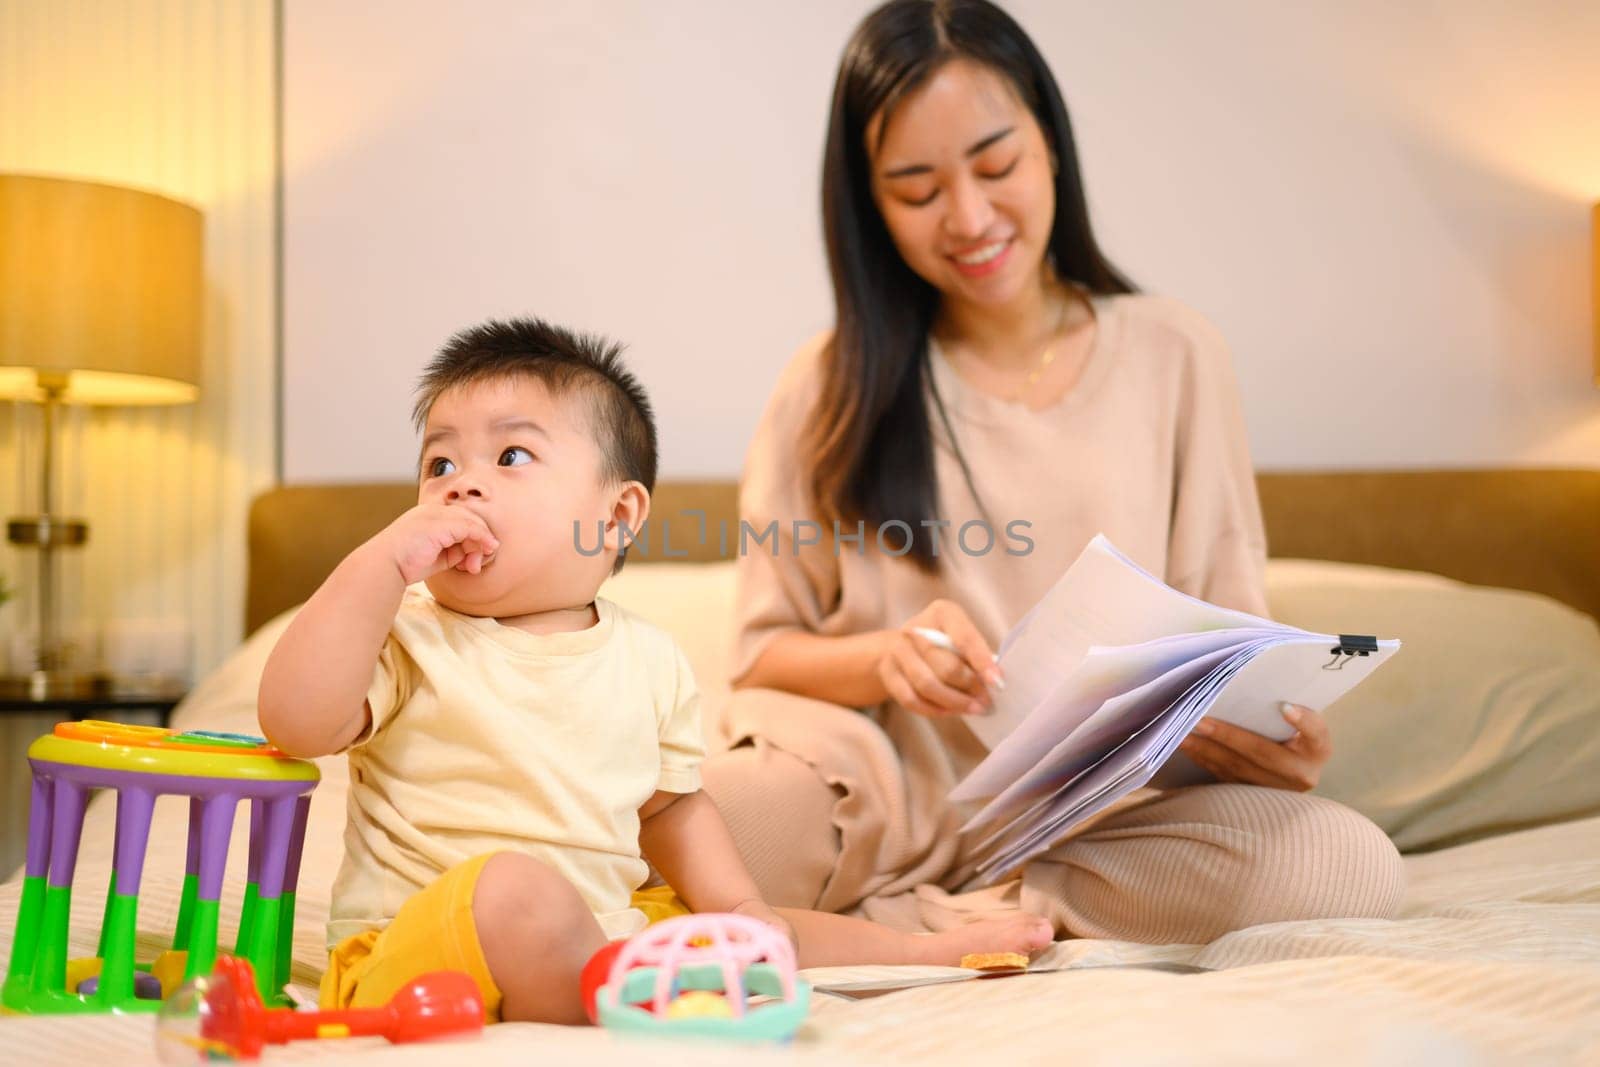 Cute baby boy playing toys on the bed next to her mother working with documents.